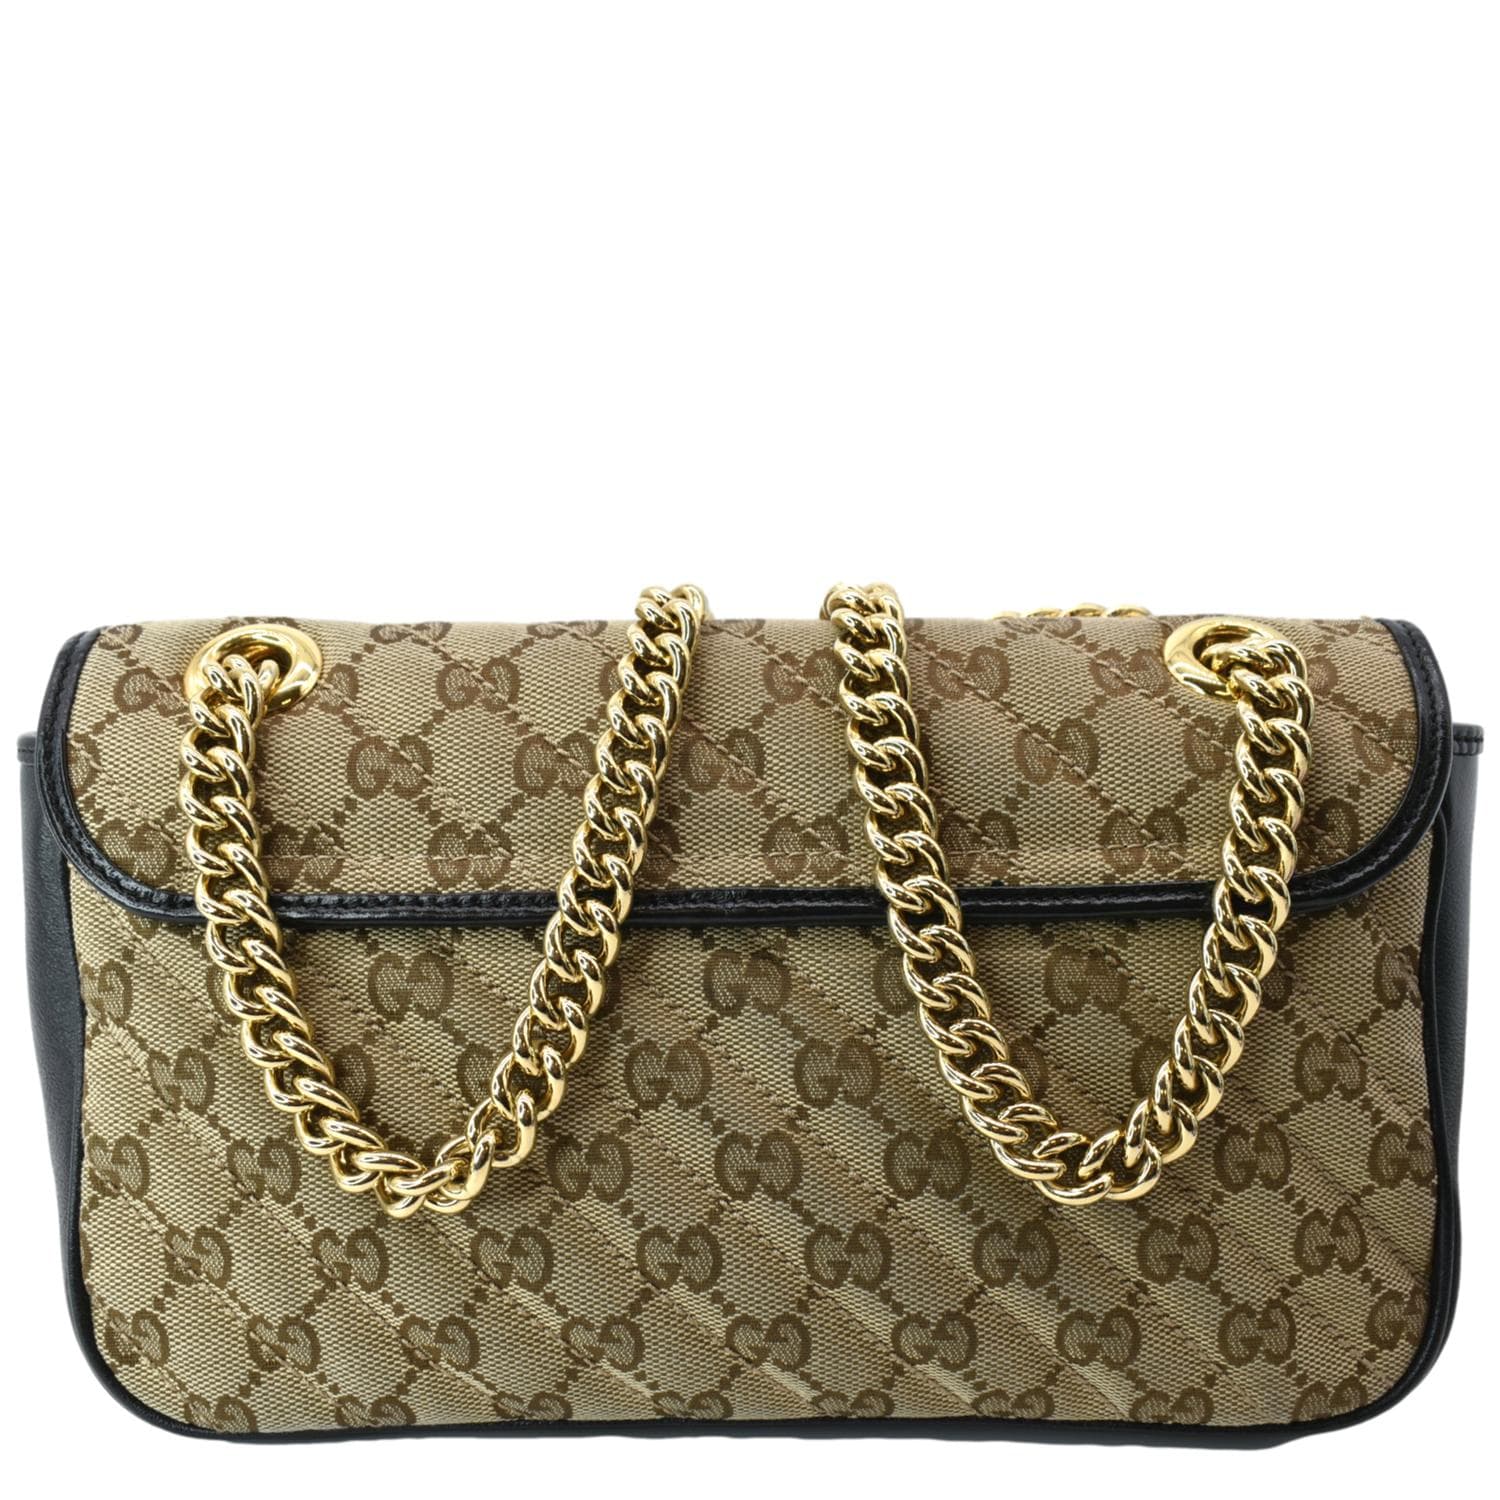 GG Marmont Small Shoulder Bag in Black - Gucci